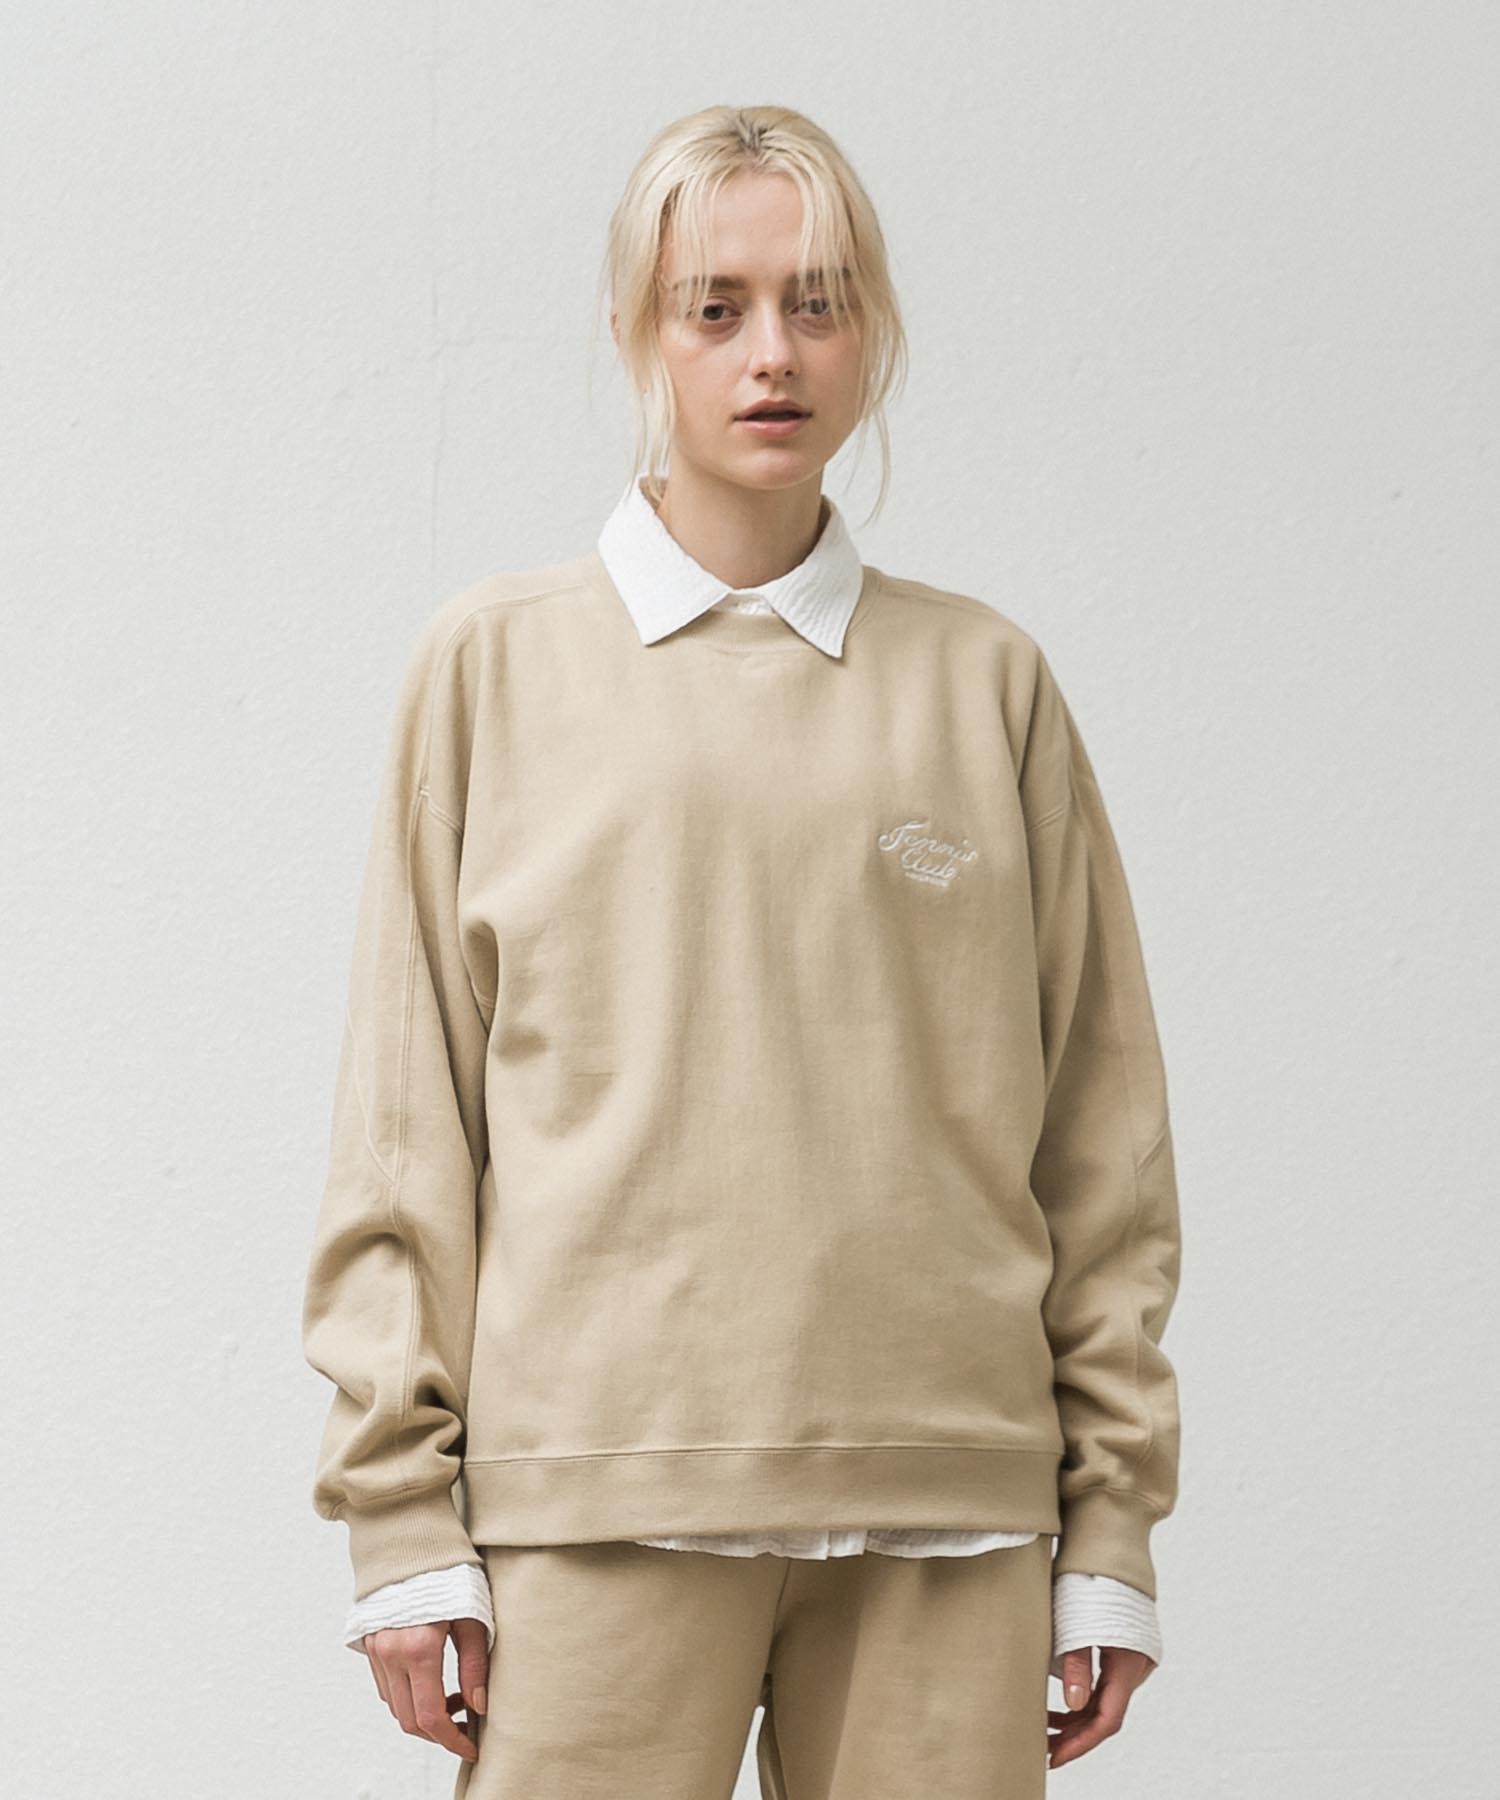 Loose Silhouette Crewneck Embroidery Sweat - YELLOW BEIGE